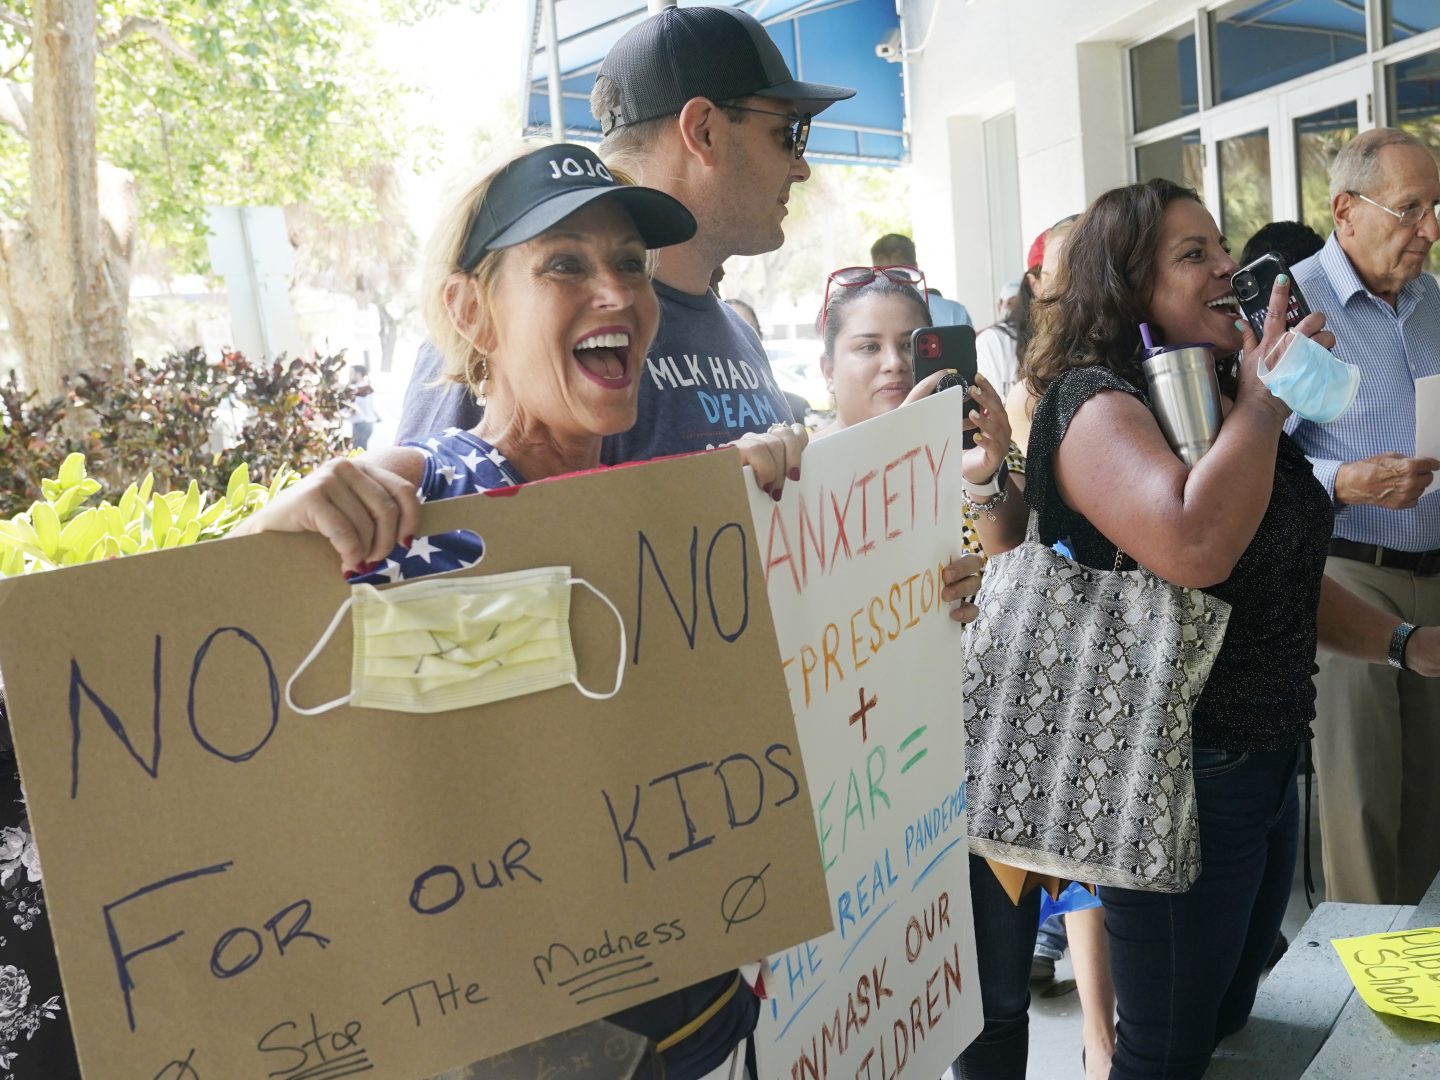 Joann Marcus of Fort Lauderdale, left, cheers as she listens to the Broward School Board's emergency meeting, Wednesday, July 28, 2021, in Fort Lauderdale, Fla. A small but vocal group spoke vehemently against masks, saying their personal rights were being eroded and their children were suffering socially.